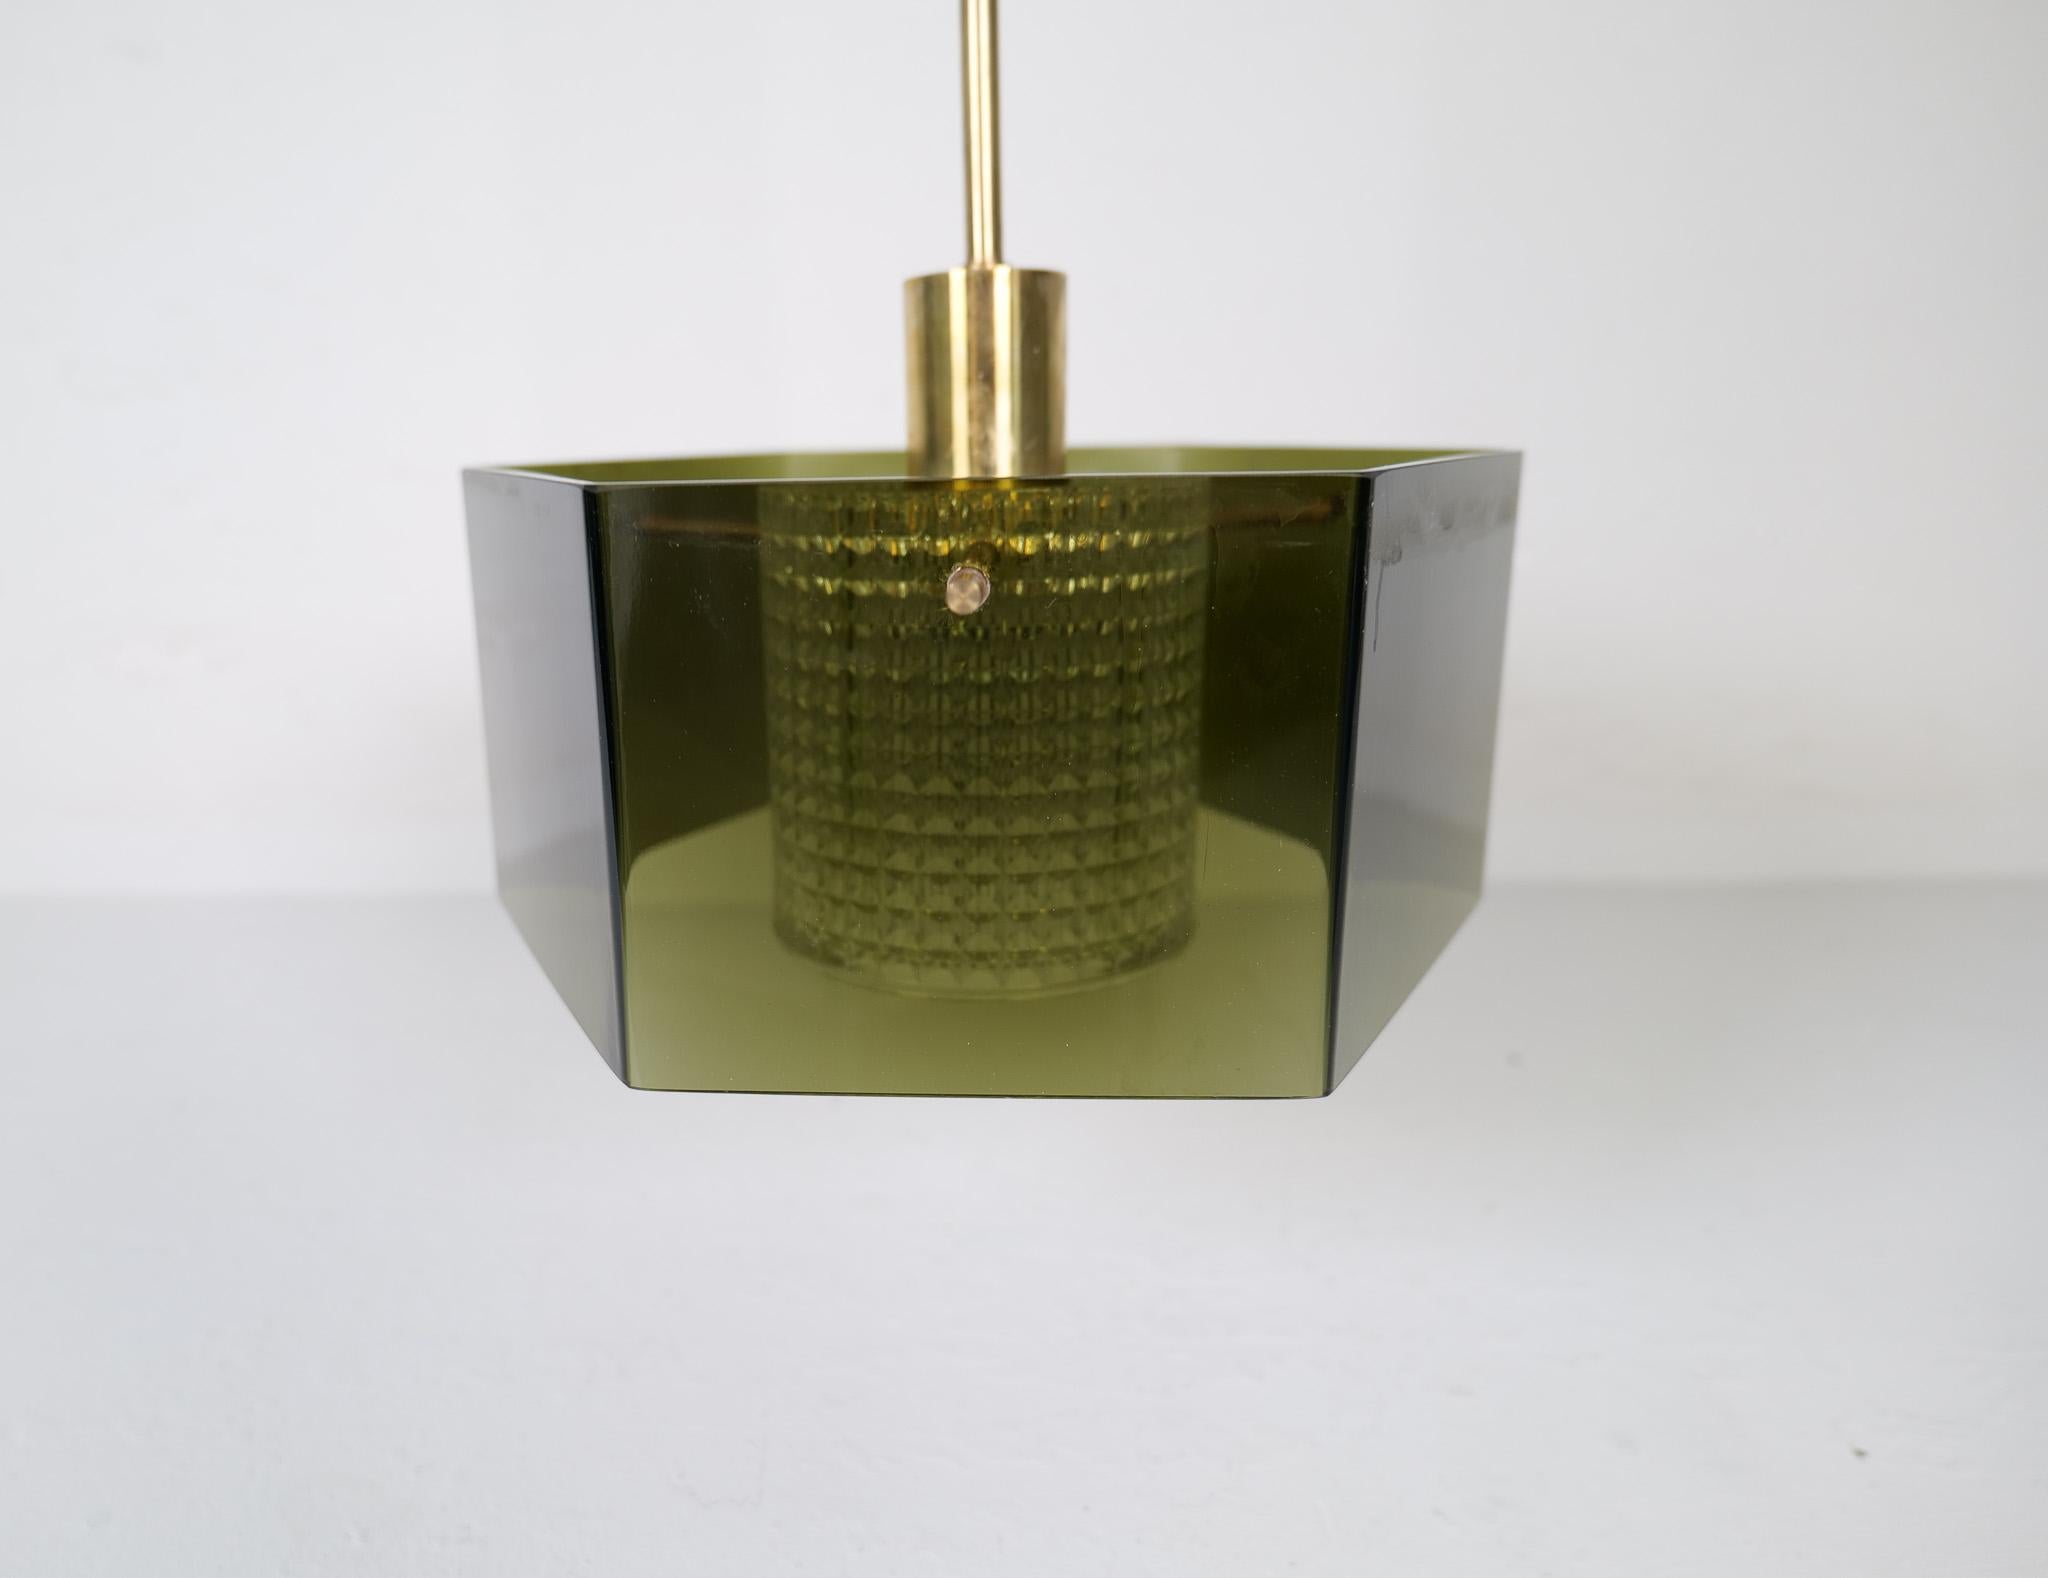 Well-made ceiling light with hand blown green glass. Nice details of brass and clear crystal glass cylinder.
Designed by Carl Fagerlund and manufactured by Orrefors circa 1960s-1970s.

The lamp is in very good vintage condition with minor wear